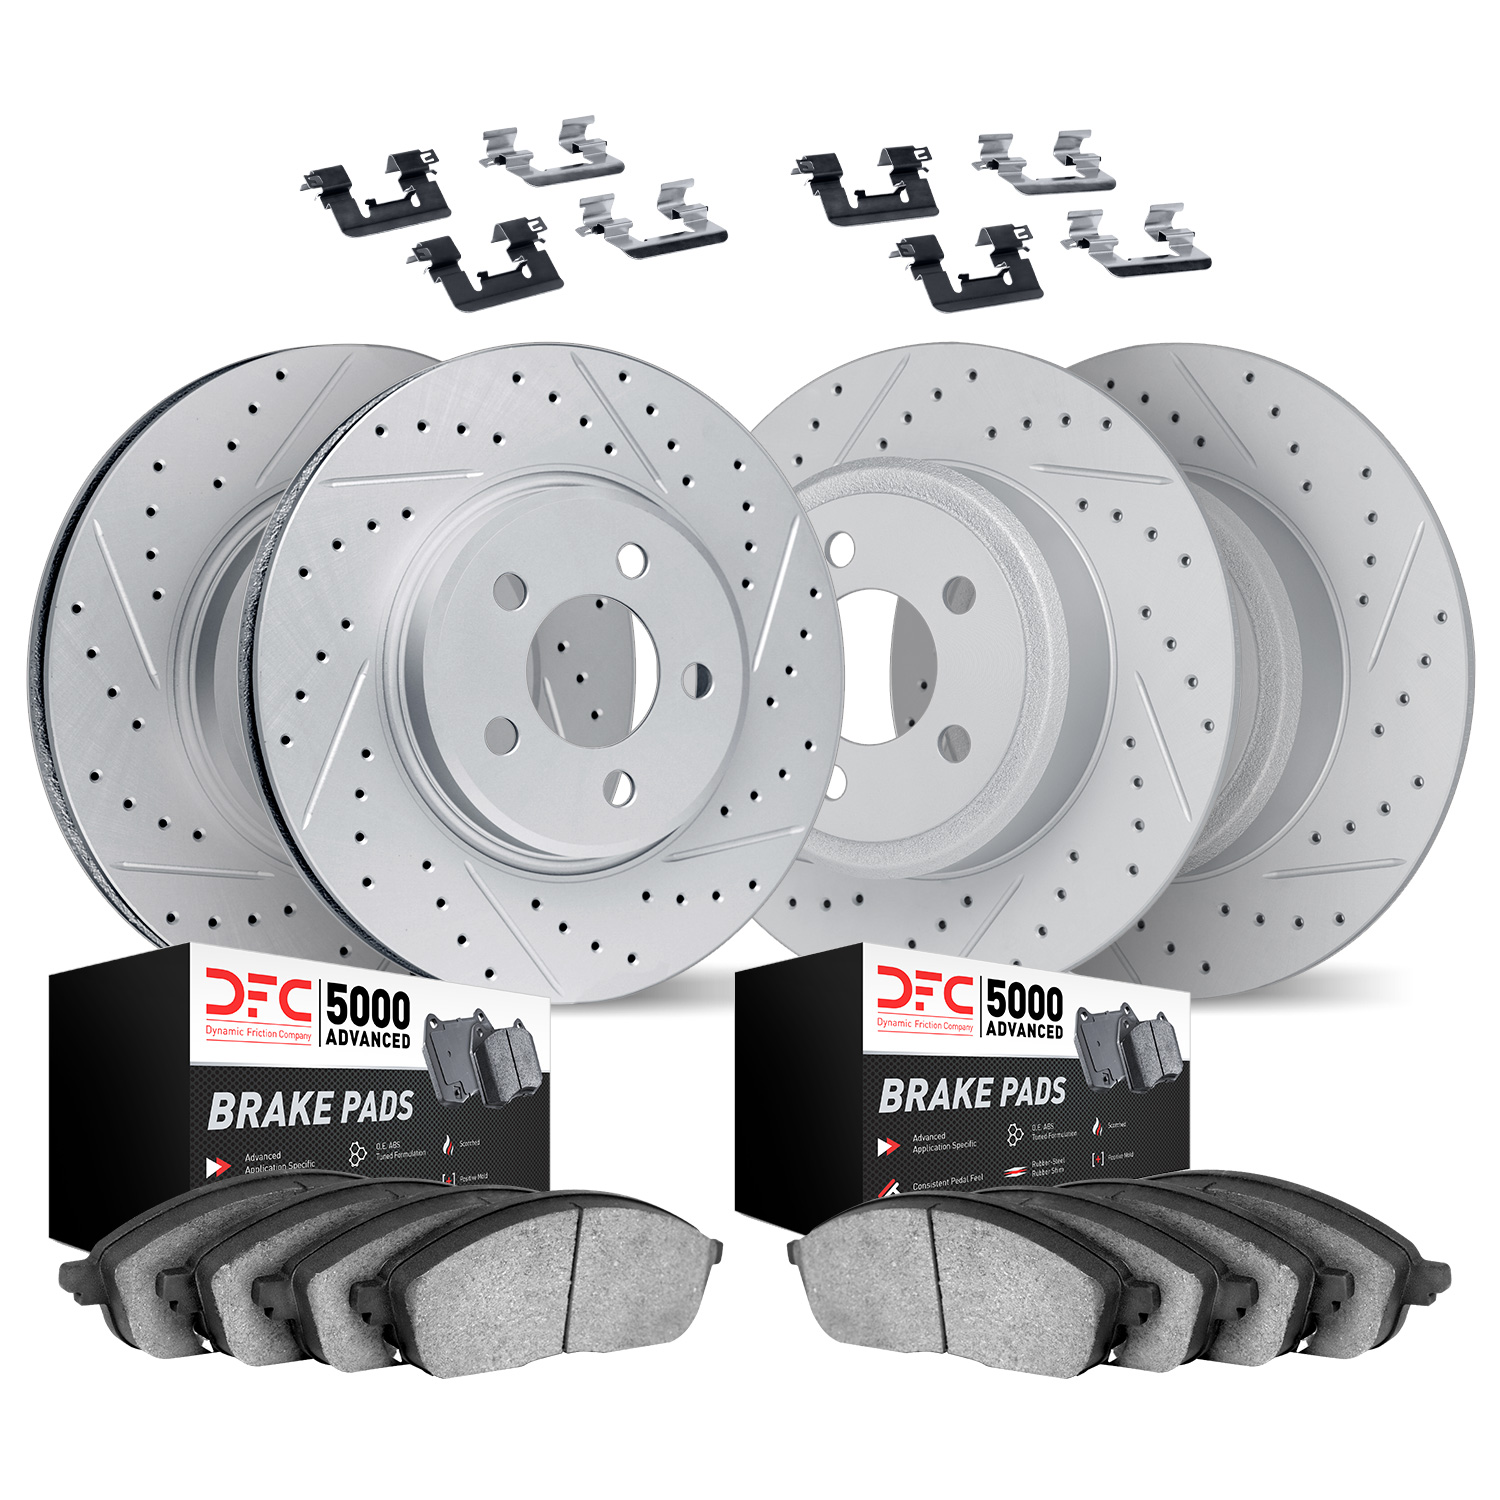 2514-11000 Geoperformance Drilled/Slotted Rotors w/5000 Advanced Brake Pads Kit & Hardware, 1994-2002 Land Rover, Position: Fron